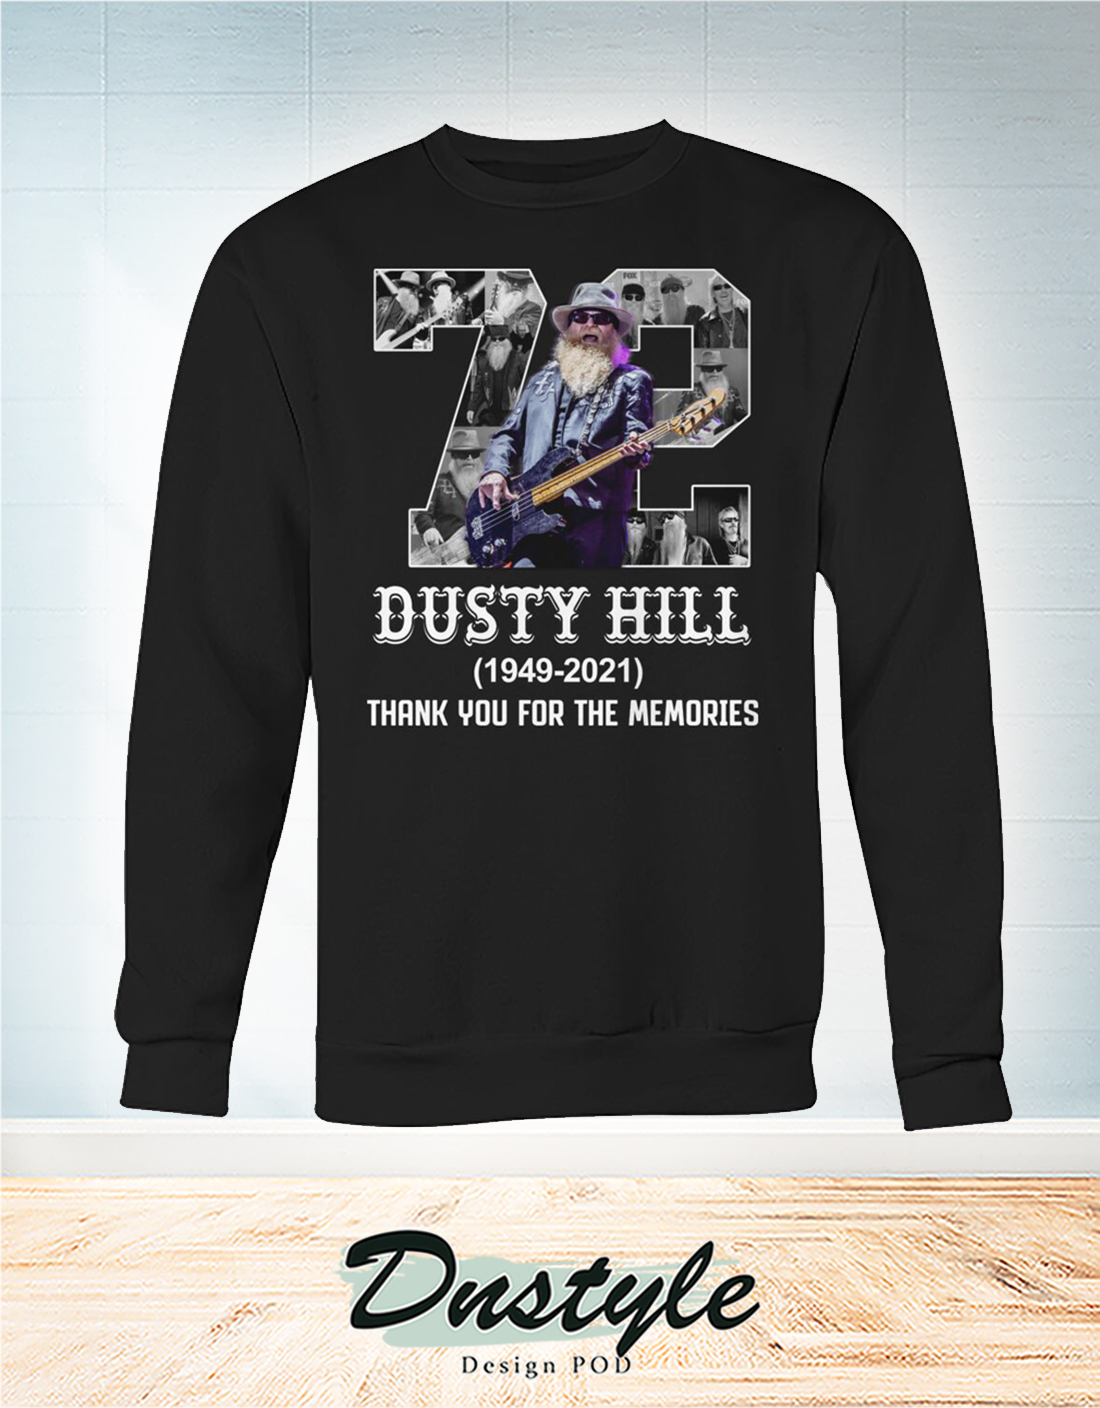 72 Dusty Hill thanks for the memories sweatshirt